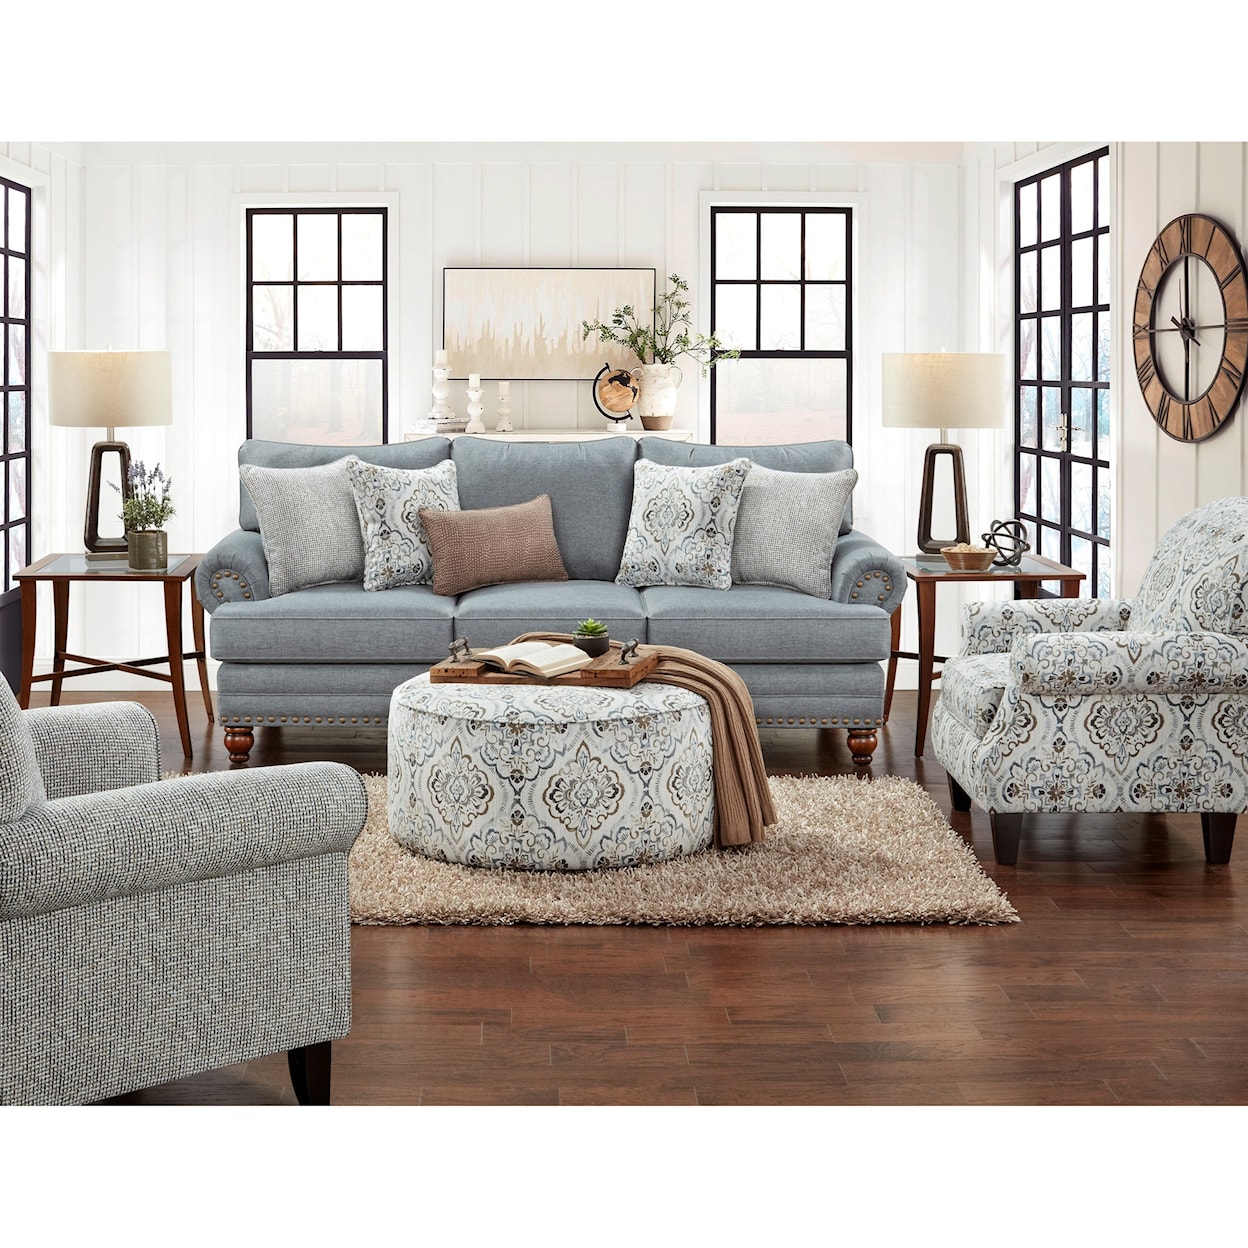 Fusion Furniture 2820KP BATES CHARCOAL Living Room Group